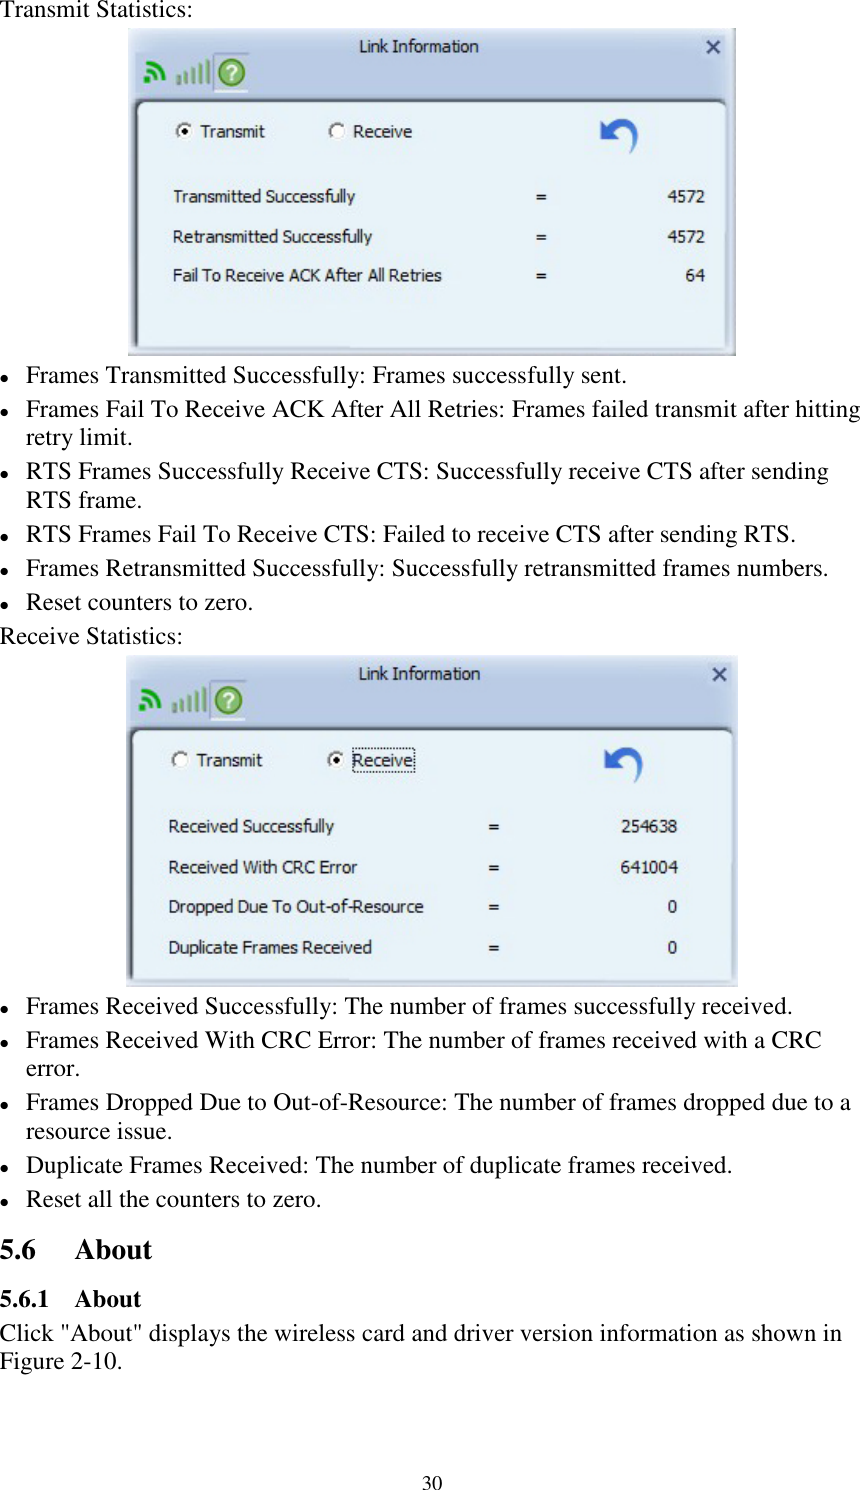 30Transmit Statistics:Frames Transmitted Successfully: Frames successfully sent.Frames Fail To Receive ACK After All Retries: Frames failed transmit after hittingretry limit.RTS Frames Successfully Receive CTS: Successfully receive CTS after sendingRTS frame.RTS Frames Fail To Receive CTS: Failed to receive CTS after sending RTS.Frames Retransmitted Successfully: Successfully retransmitted frames numbers.Reset counters to zero.Receive Statistics:Frames Received Successfully: The number of frames successfully received.Frames Received With CRC Error: The number of frames received with a CRCerror.Frames Dropped Due to Out-of-Resource: The number of frames dropped due to aresource issue.Duplicate Frames Received: The number of duplicate frames received.Reset all the counters to zero.5.6 About5.6.1 AboutClick &quot;About&quot; displays the wireless card and driver version information as shown inFigure 2-10.